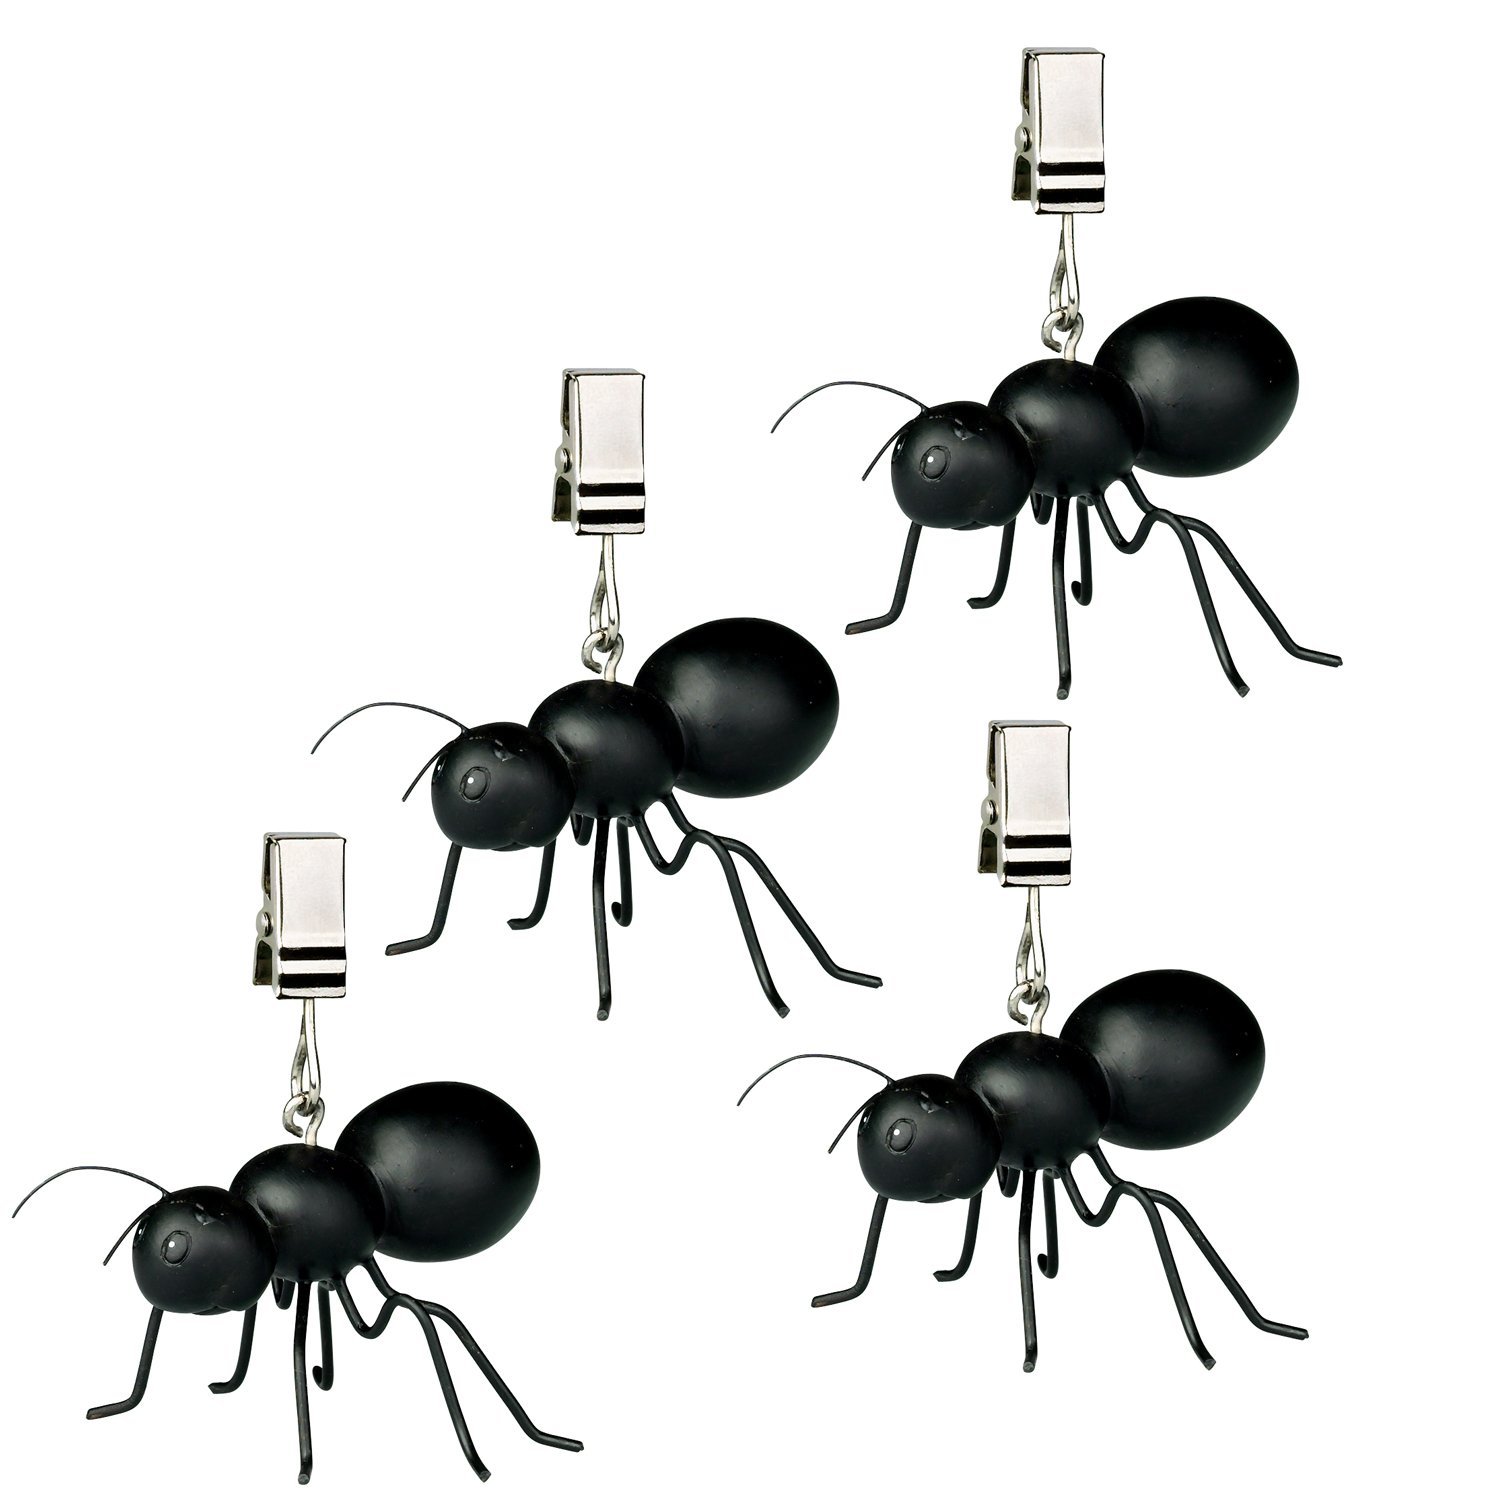 Tablecloth Weights, Ants